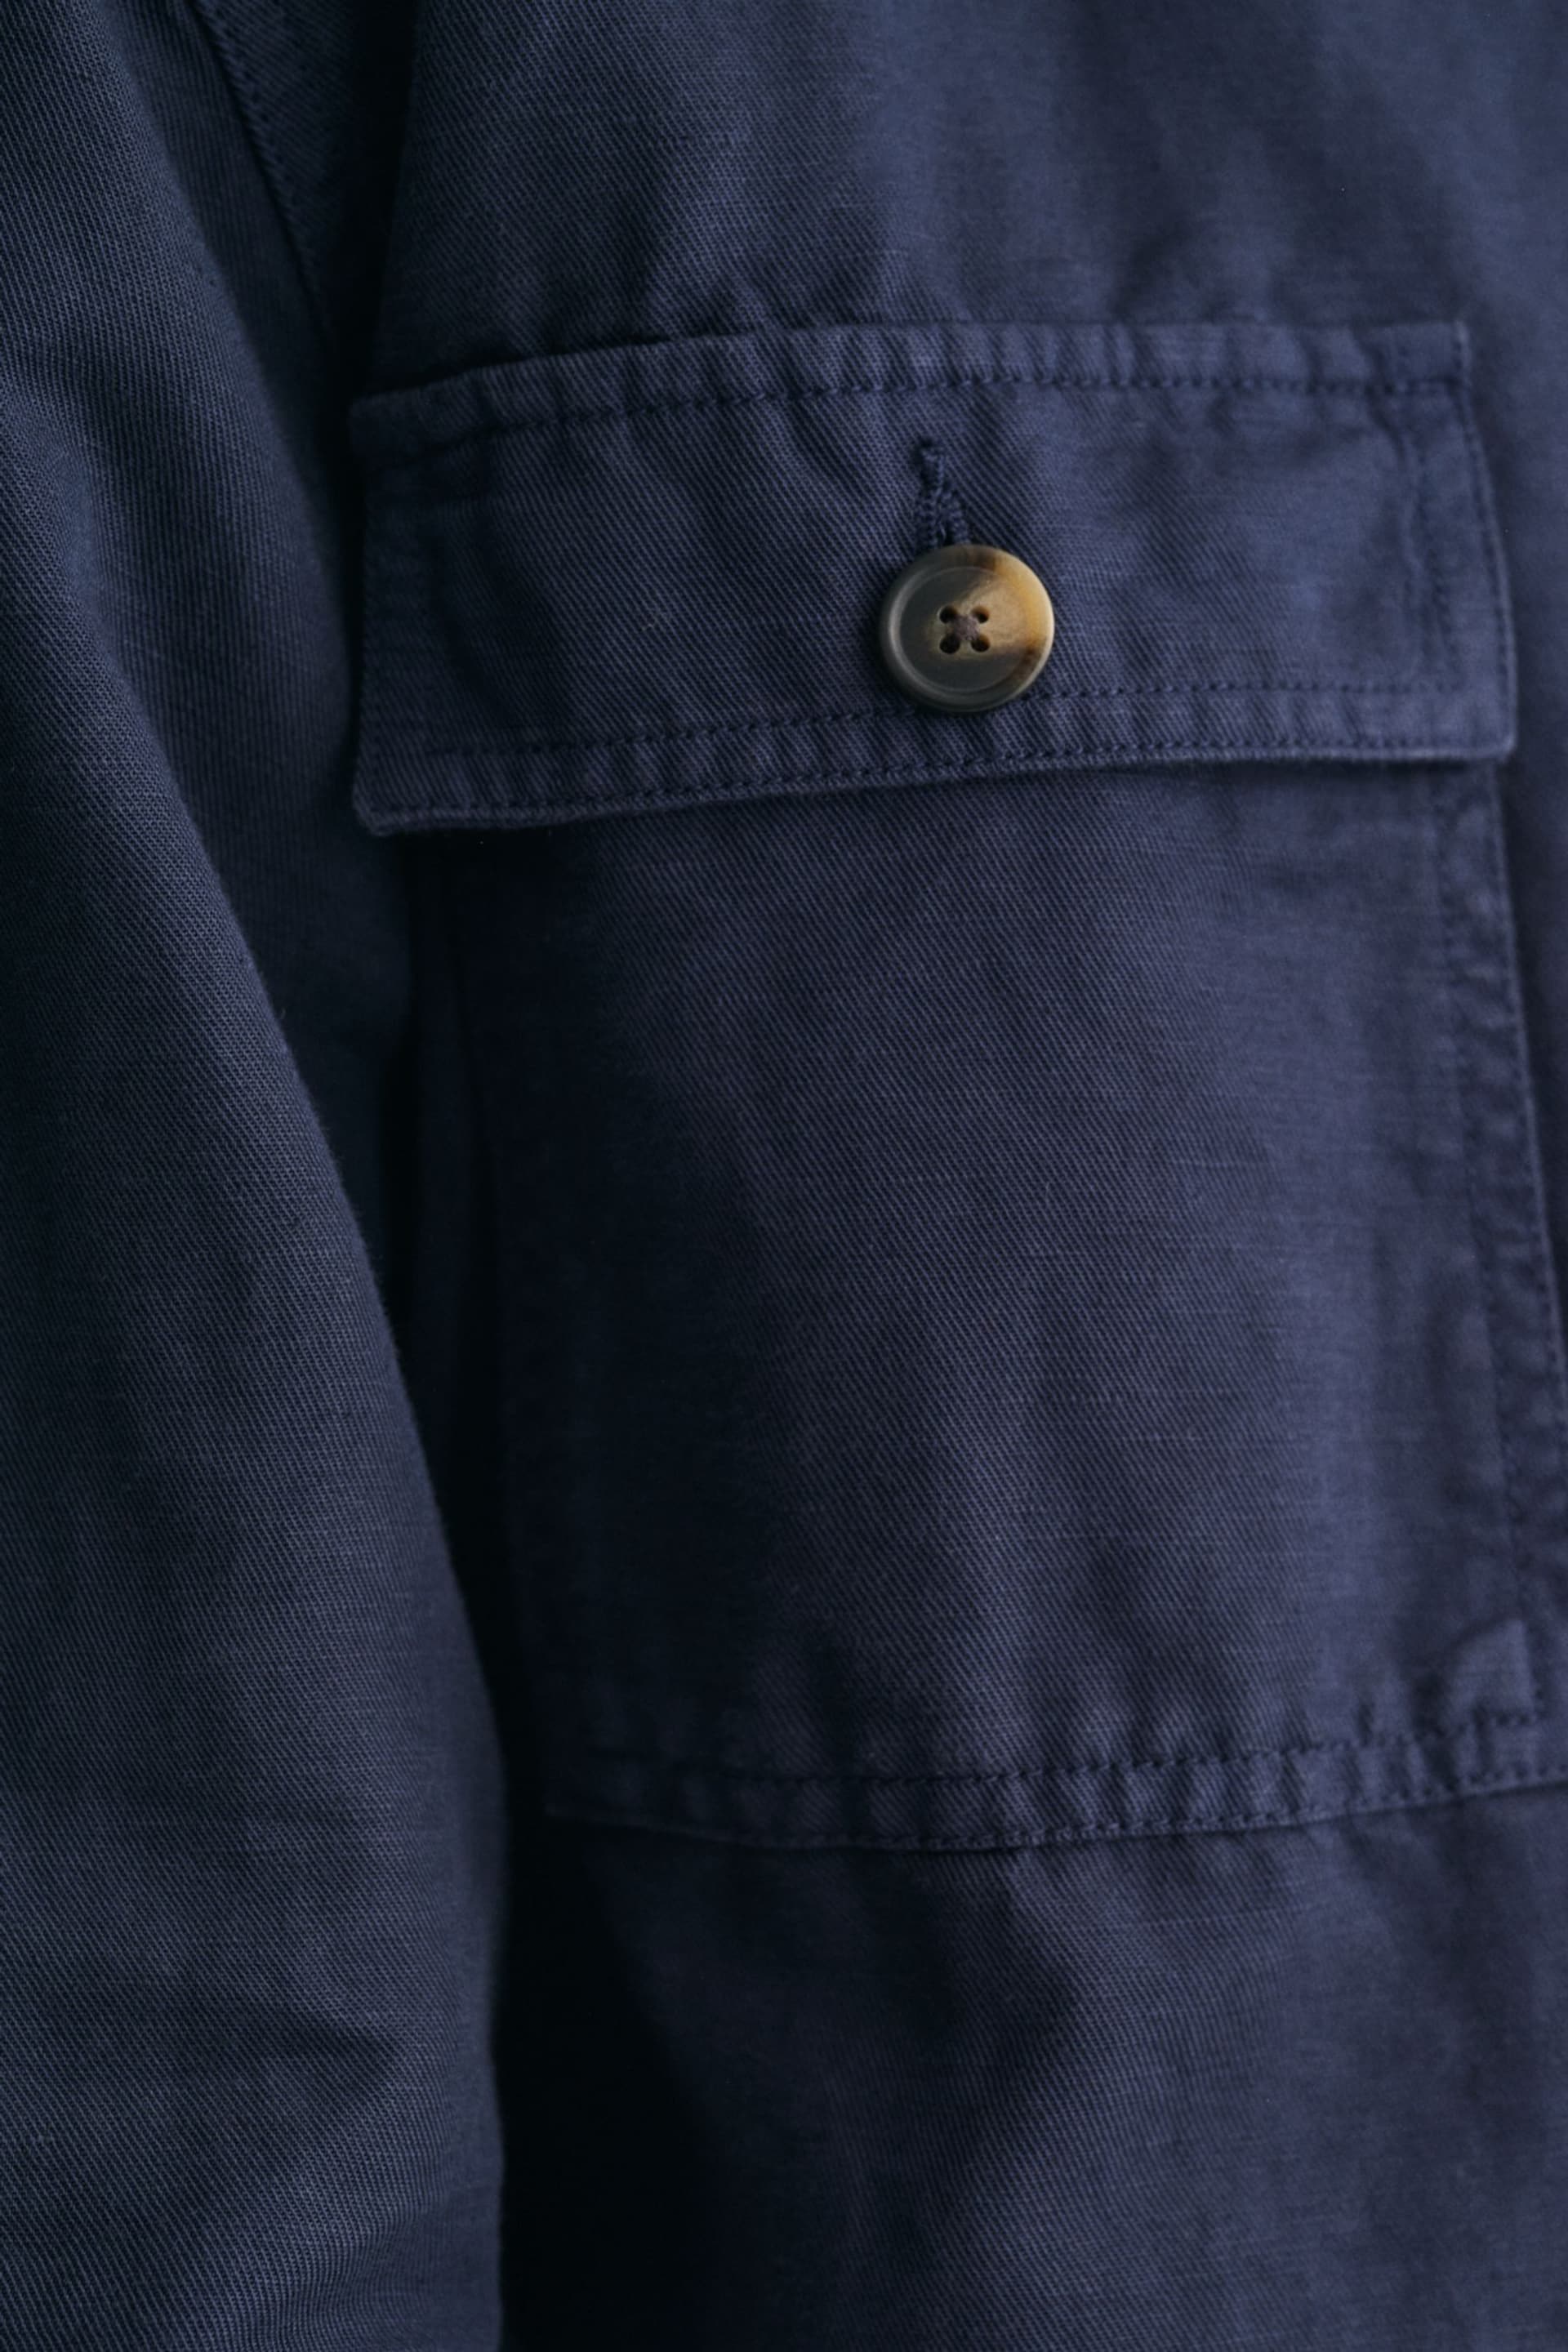 GANT Relaxed Fit Cotton Linen Twill Overshirt - Image 6 of 7